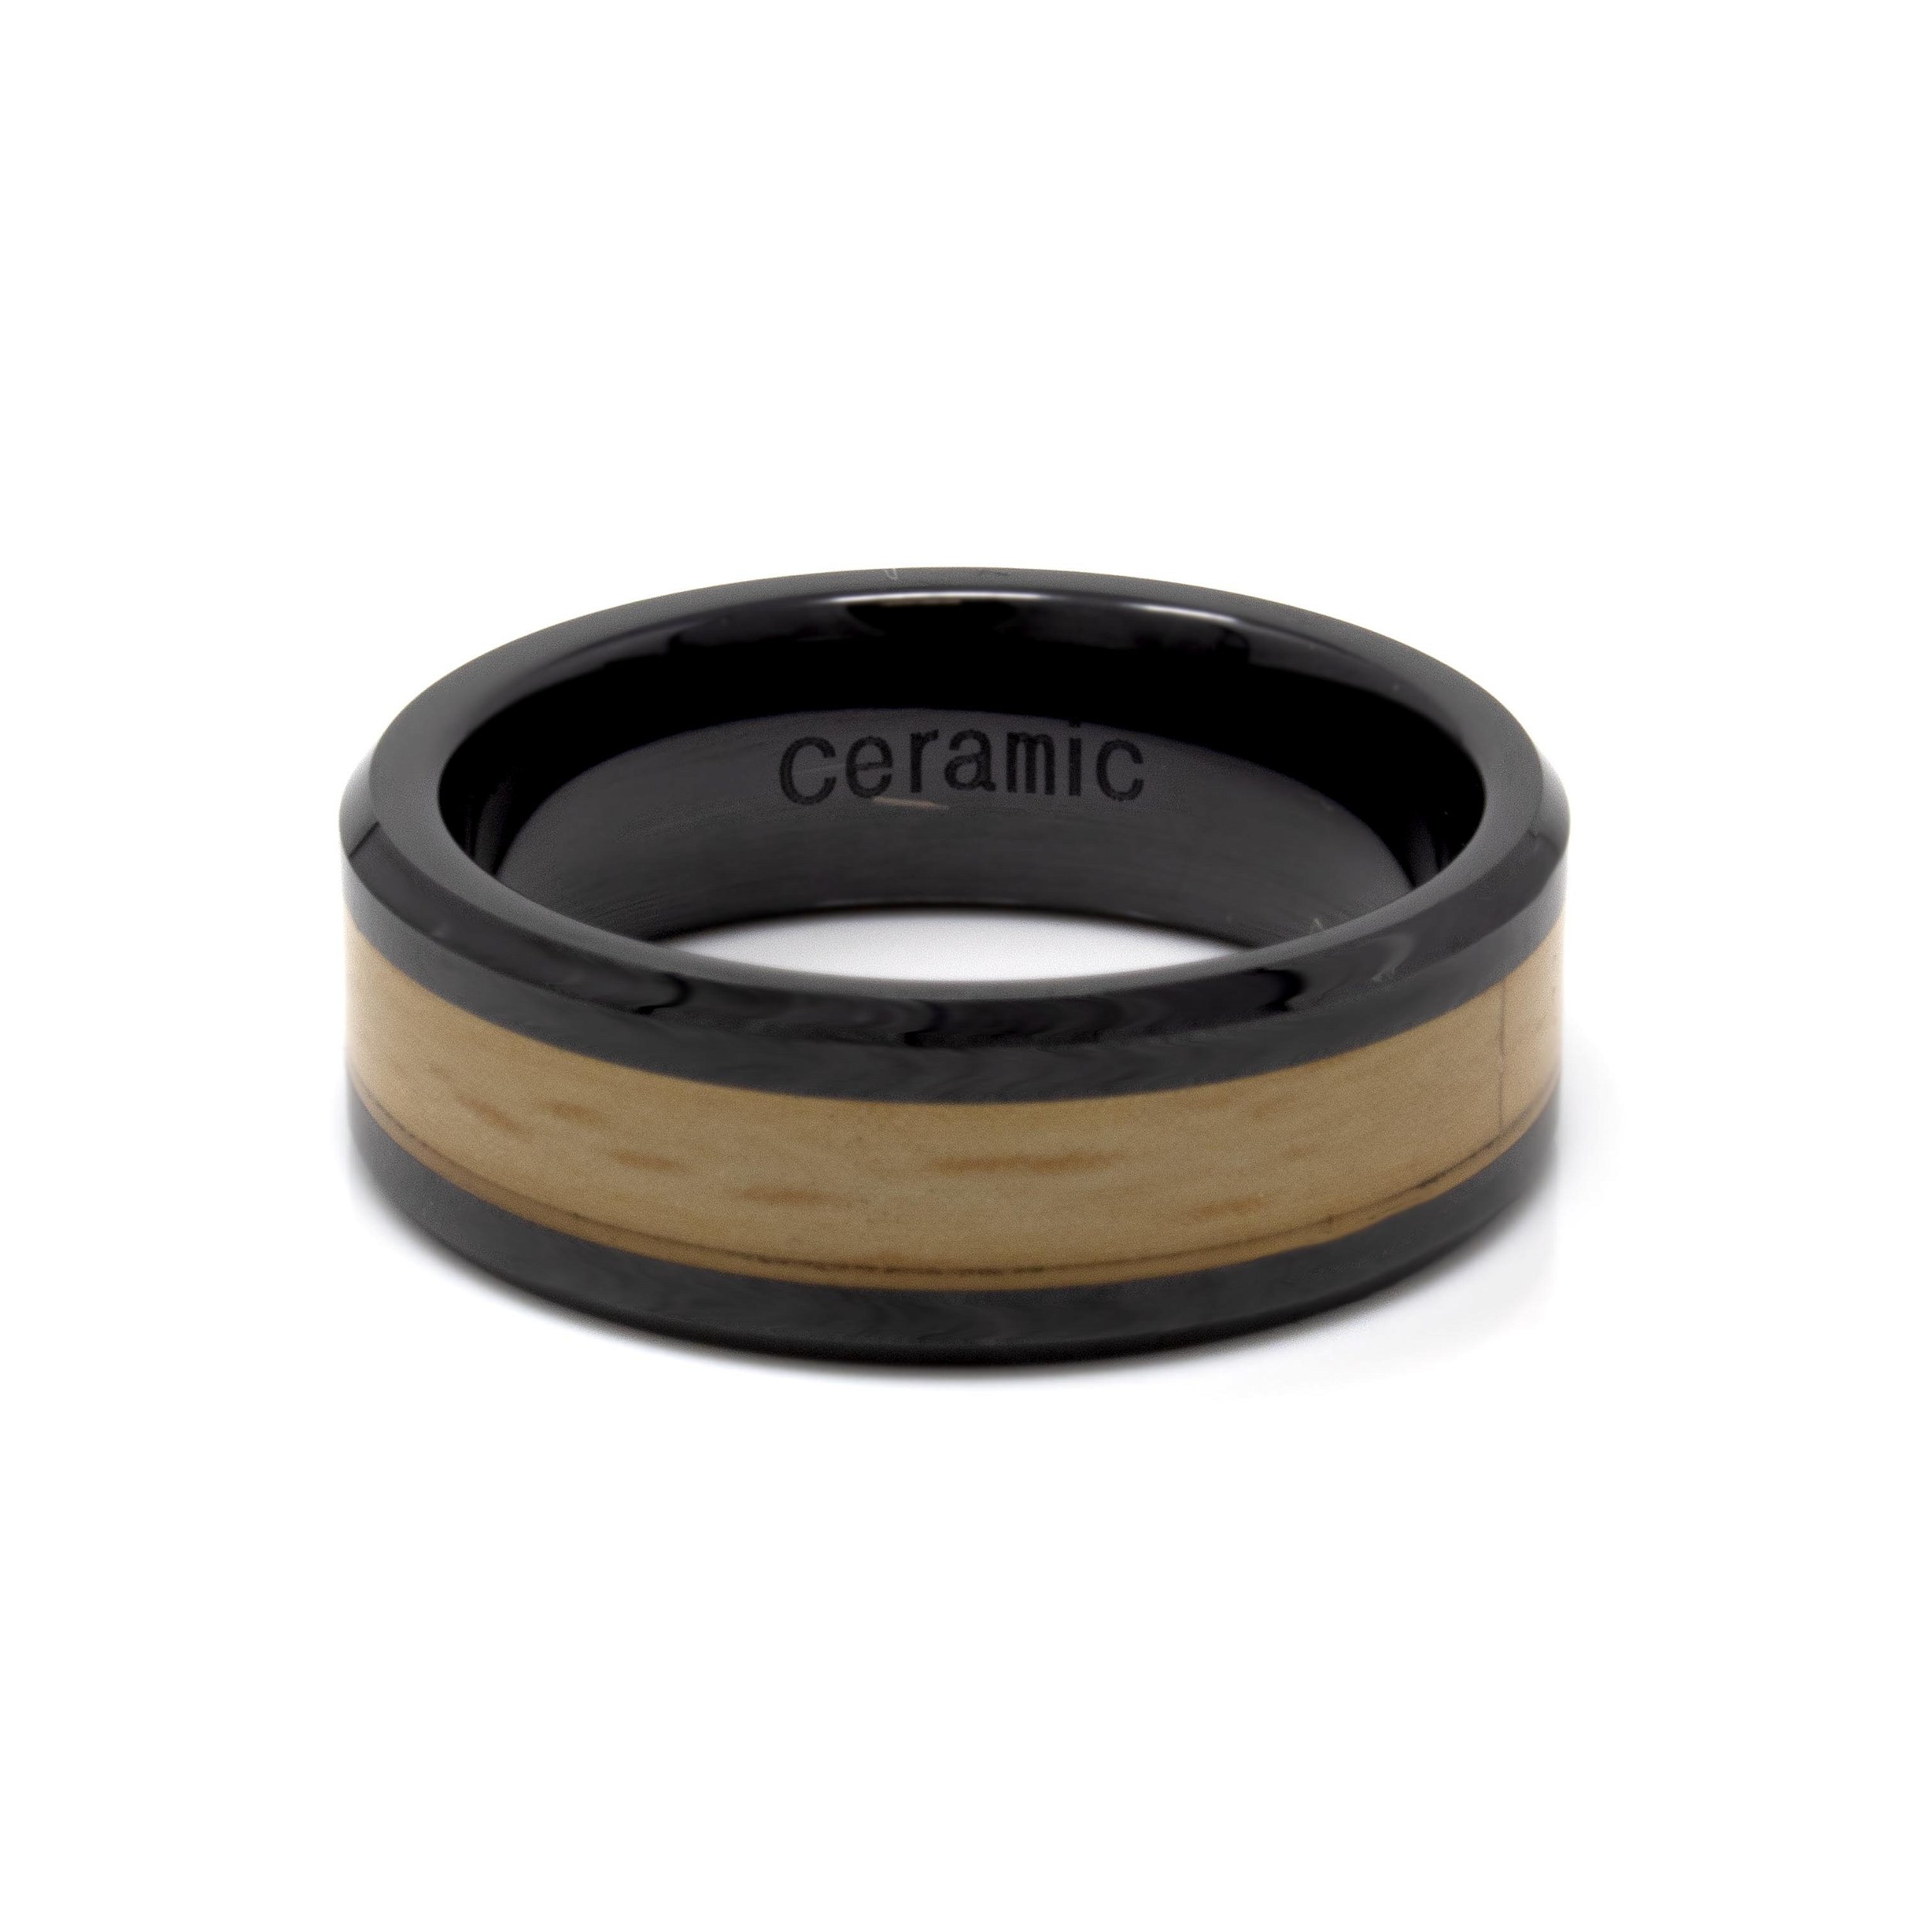 Ceramic Ring Size 12.5 - 8mm With Black Ip Plated & Wood Inlay Center